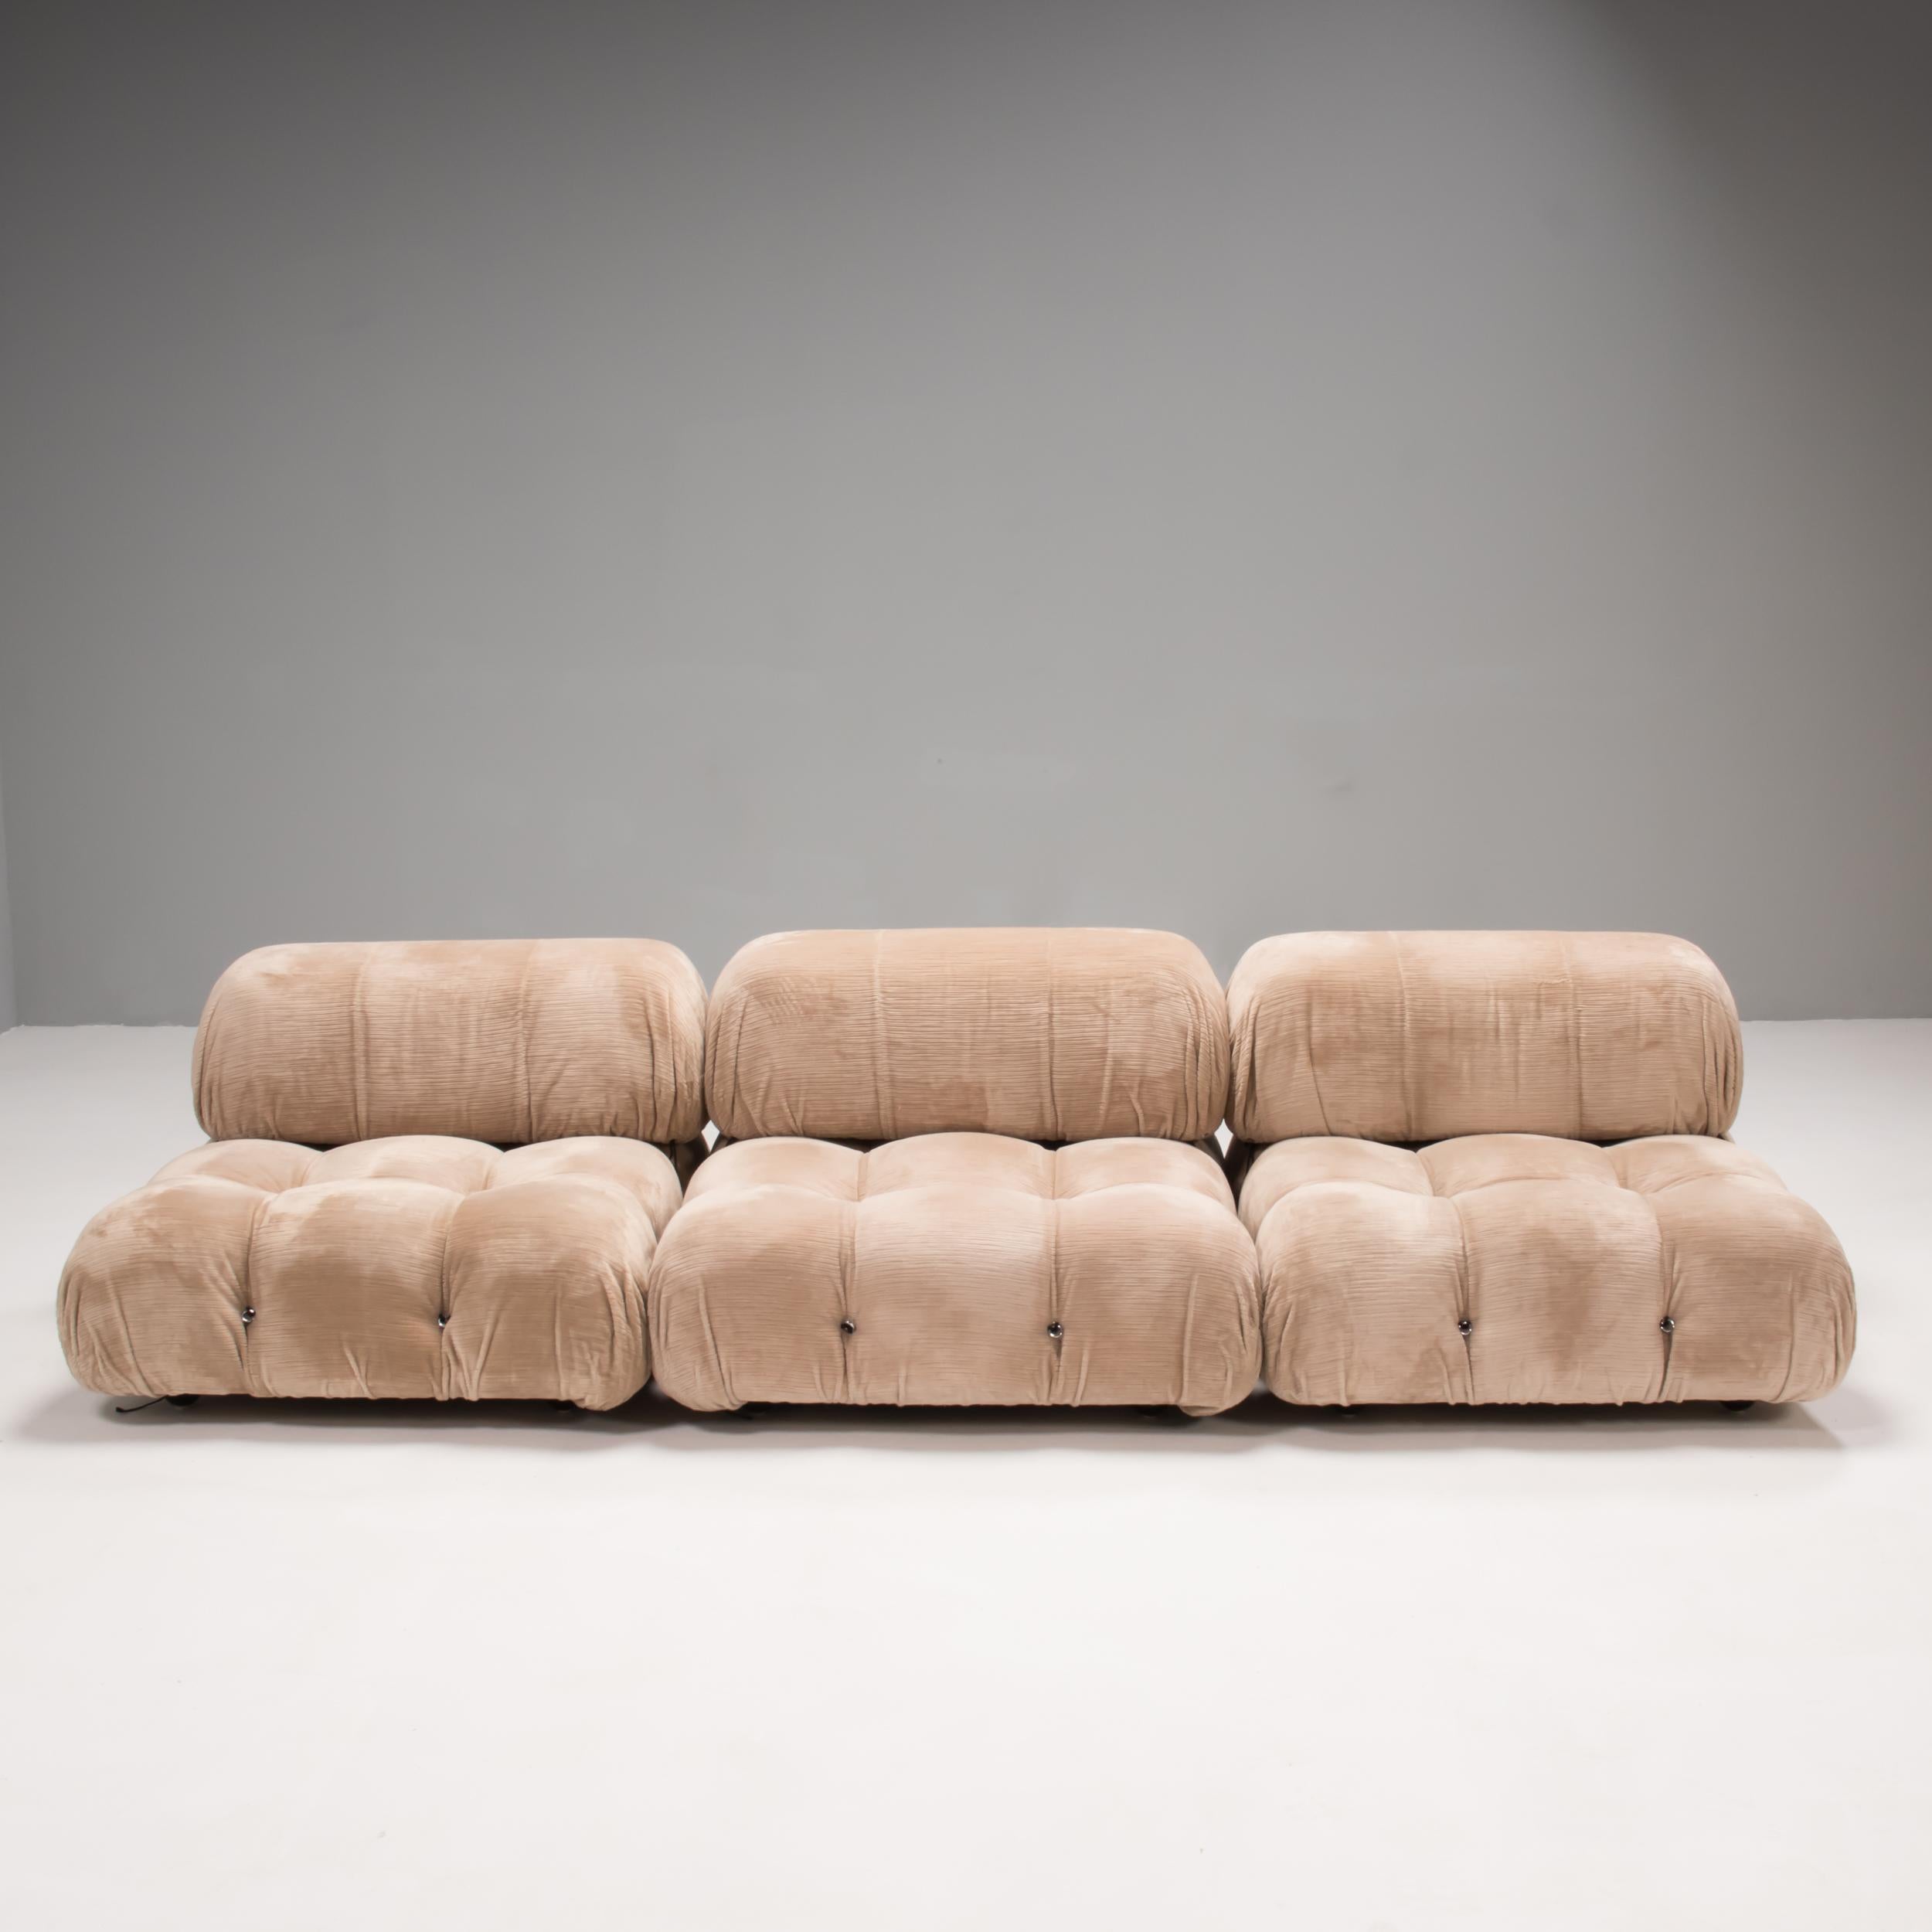 Originally designed by Mario Bellini in 1972 for the Museum of Modern Art exhibition ‘Italy: The New Domestic Landscape’, the Camaleonda was manufactured by B&B Italia for 5 years until 1979.

Since then the Camaleonda sofa has become a design